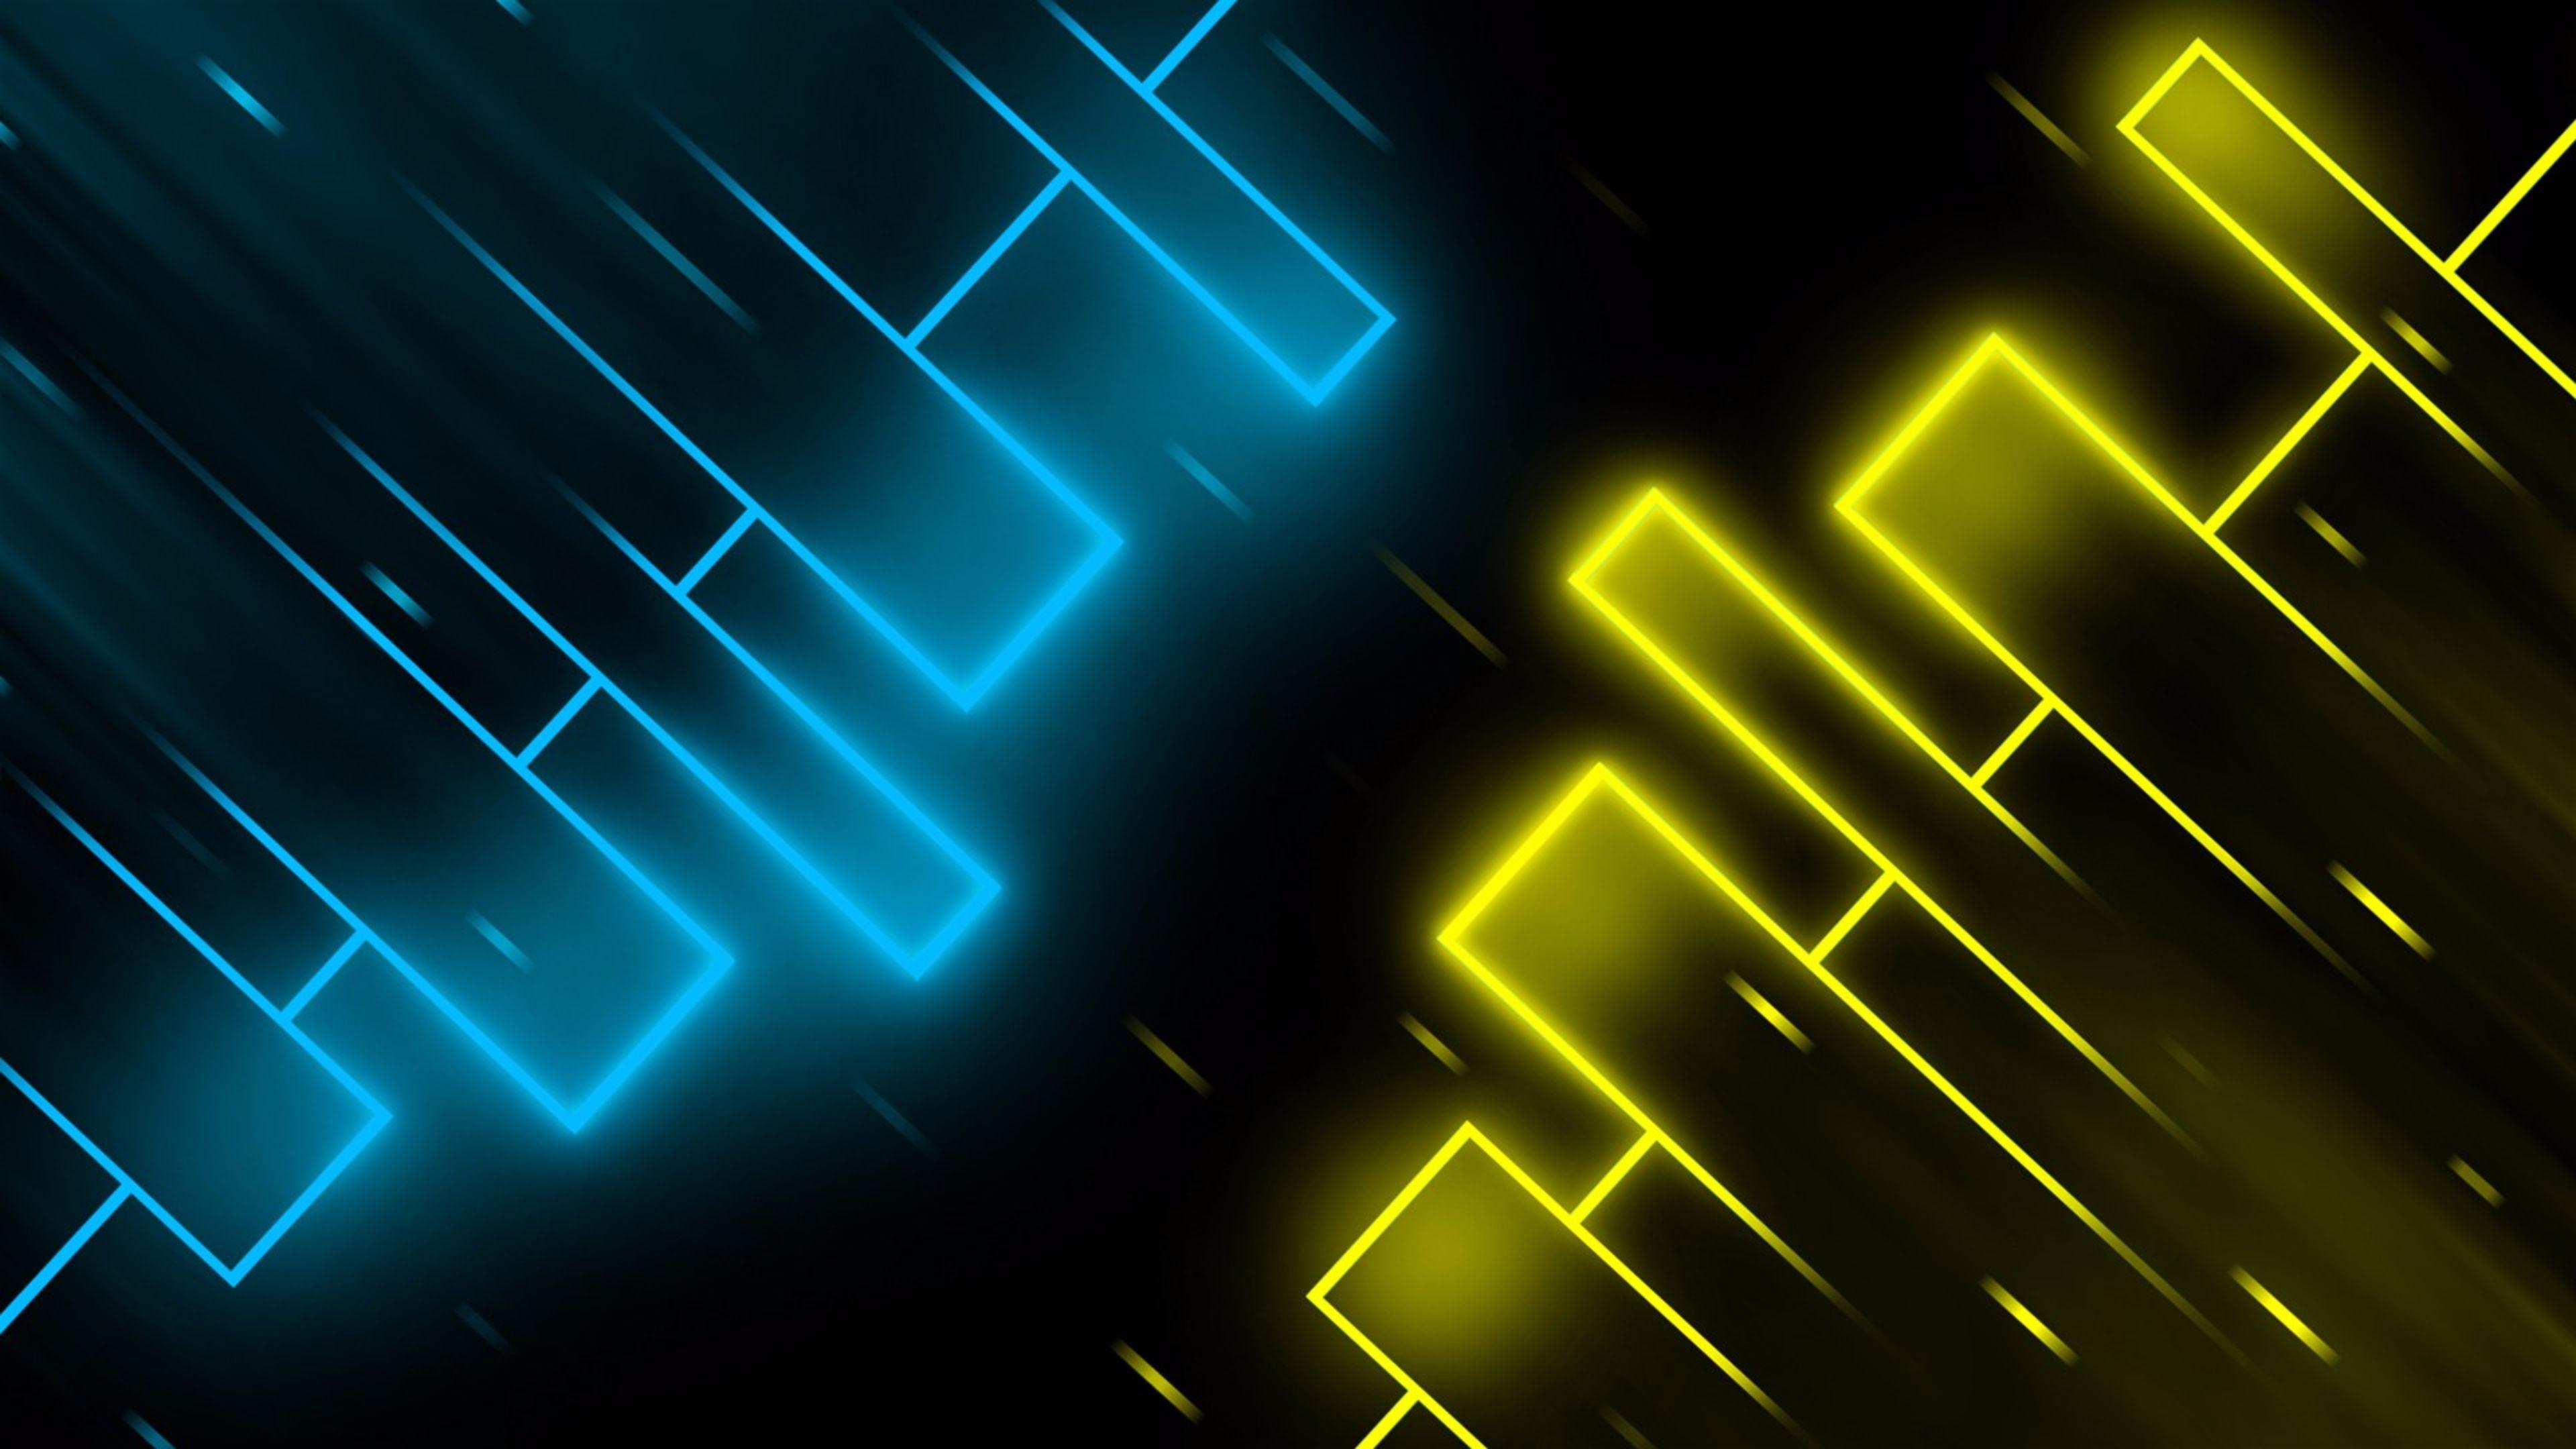 Blue and Gold 2016 4K Abstract Wallpaper. Free 4K Wallpaper